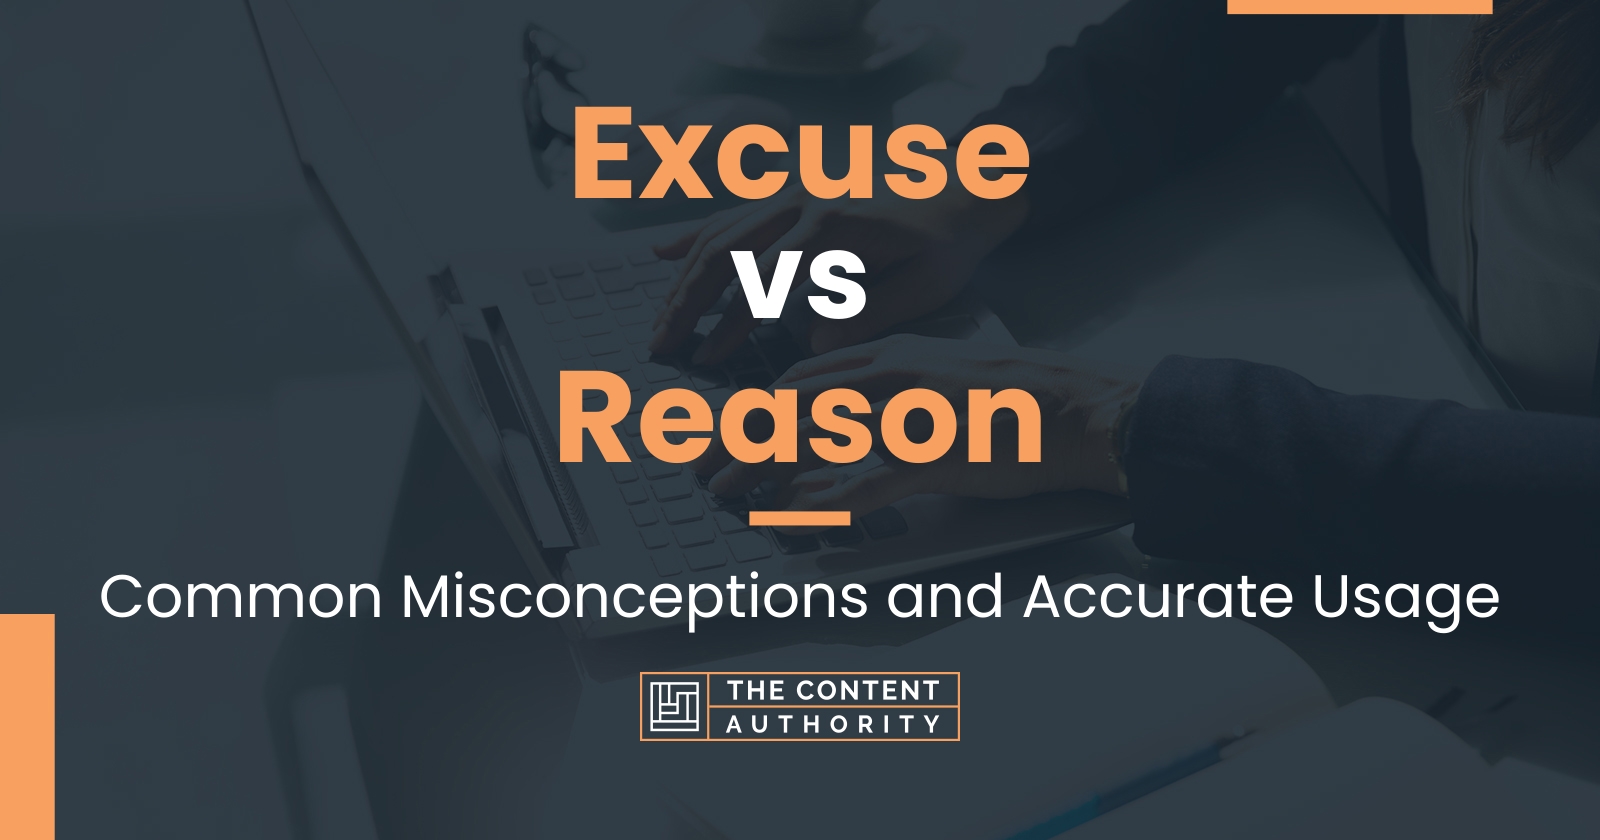 Excuse vs Reason: Common Misconceptions and Accurate Usage